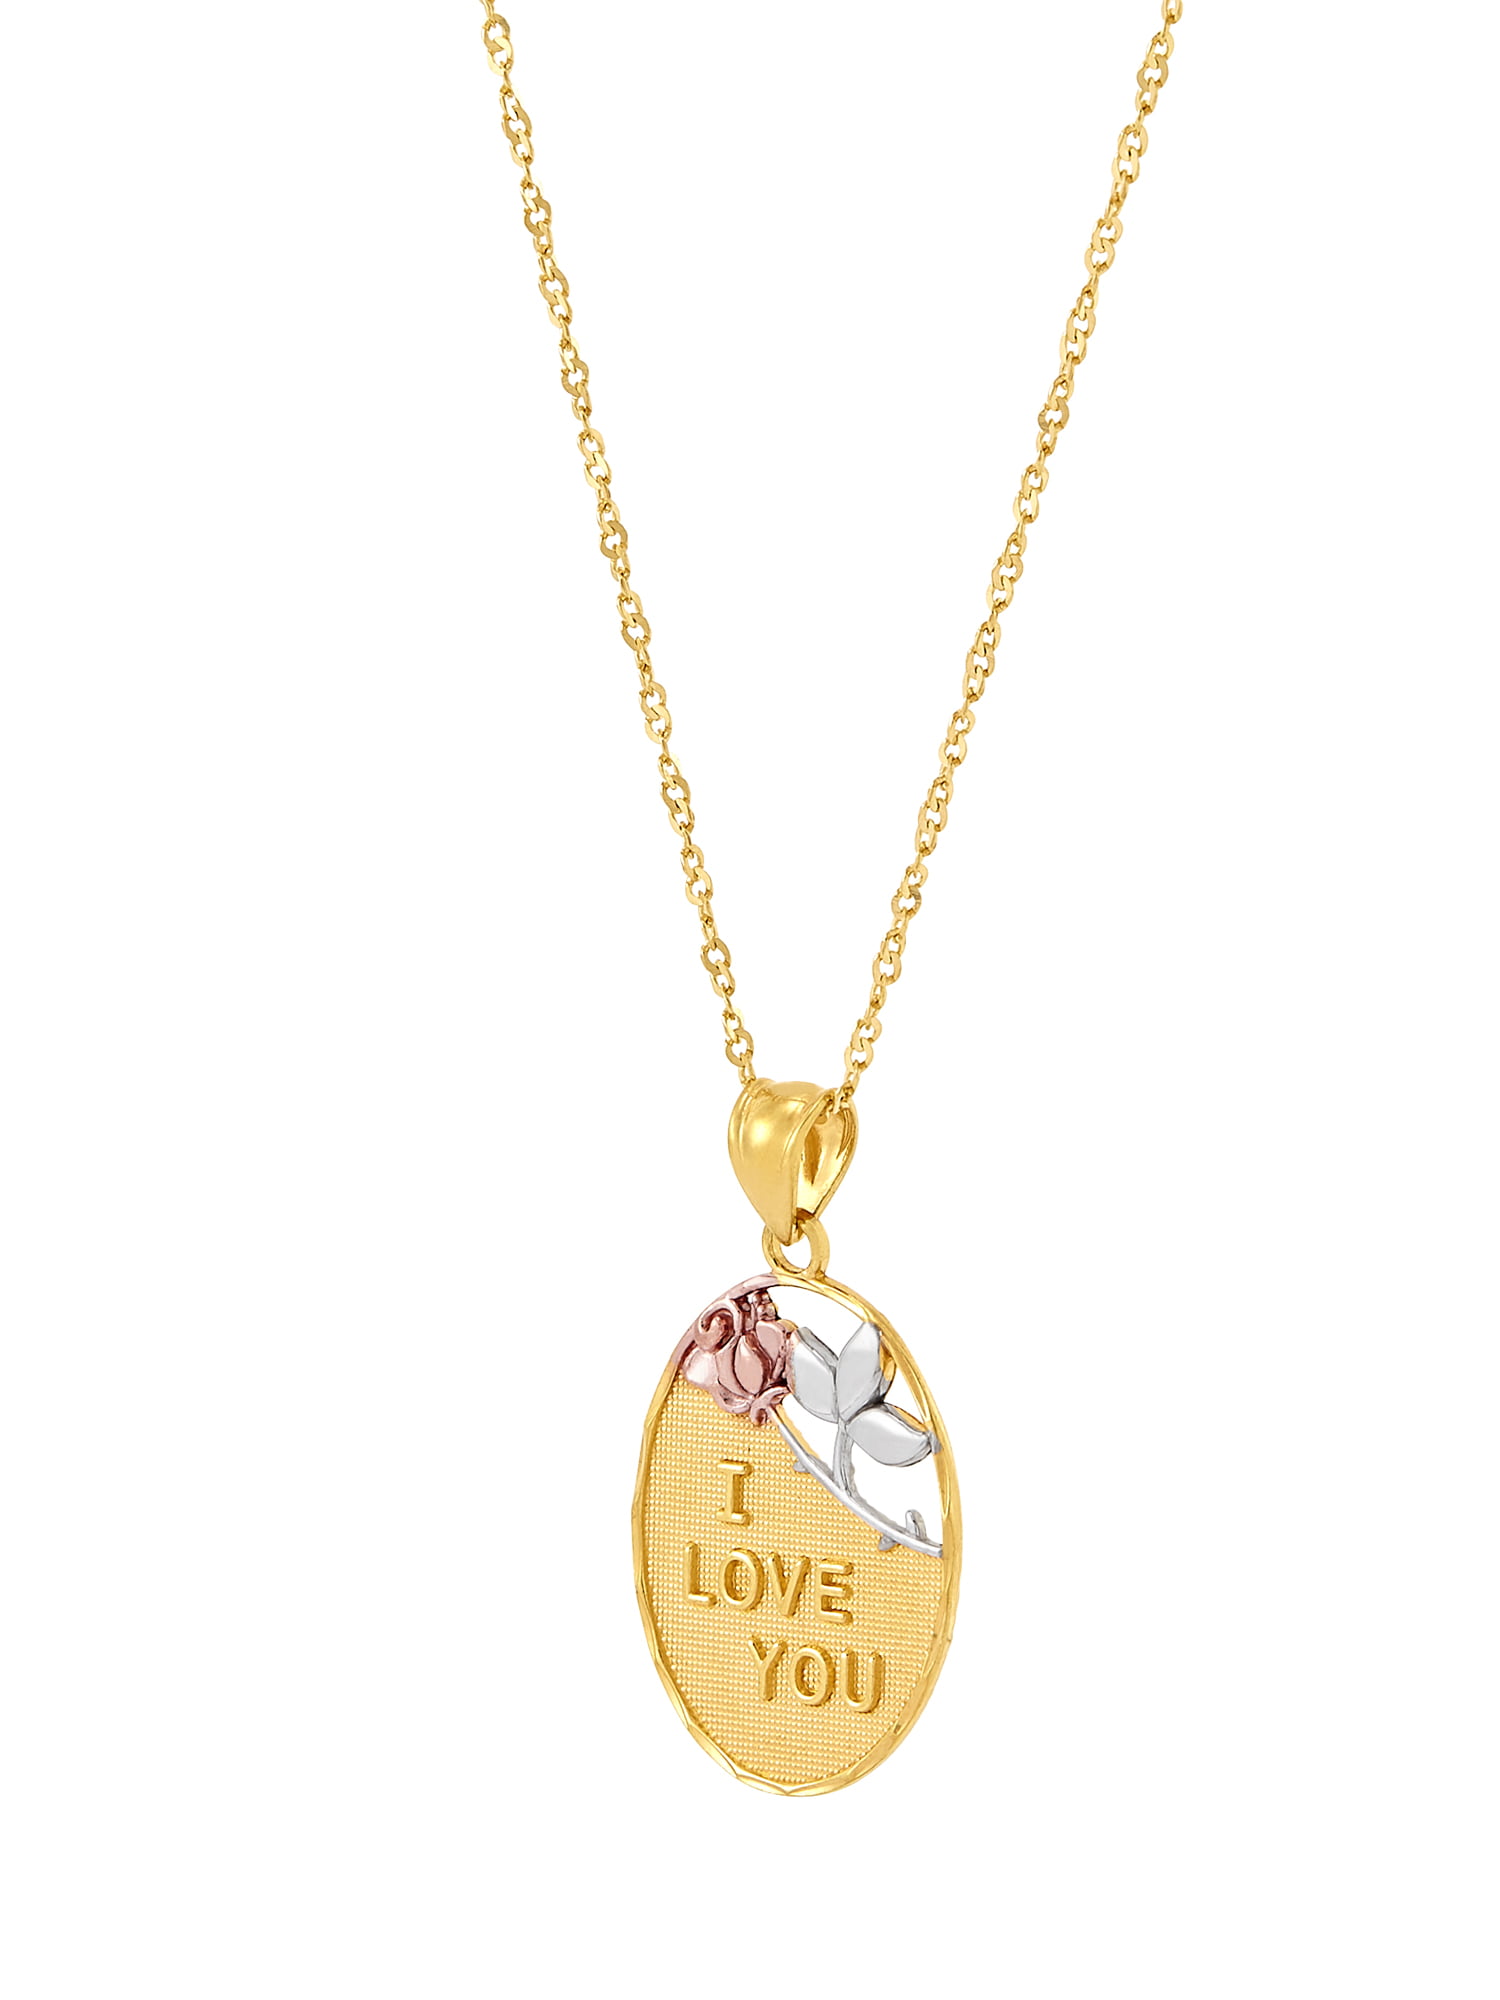 SISGEM 18k Yellow Gold I Love You Heart Necklace for Women, India | Ubuy